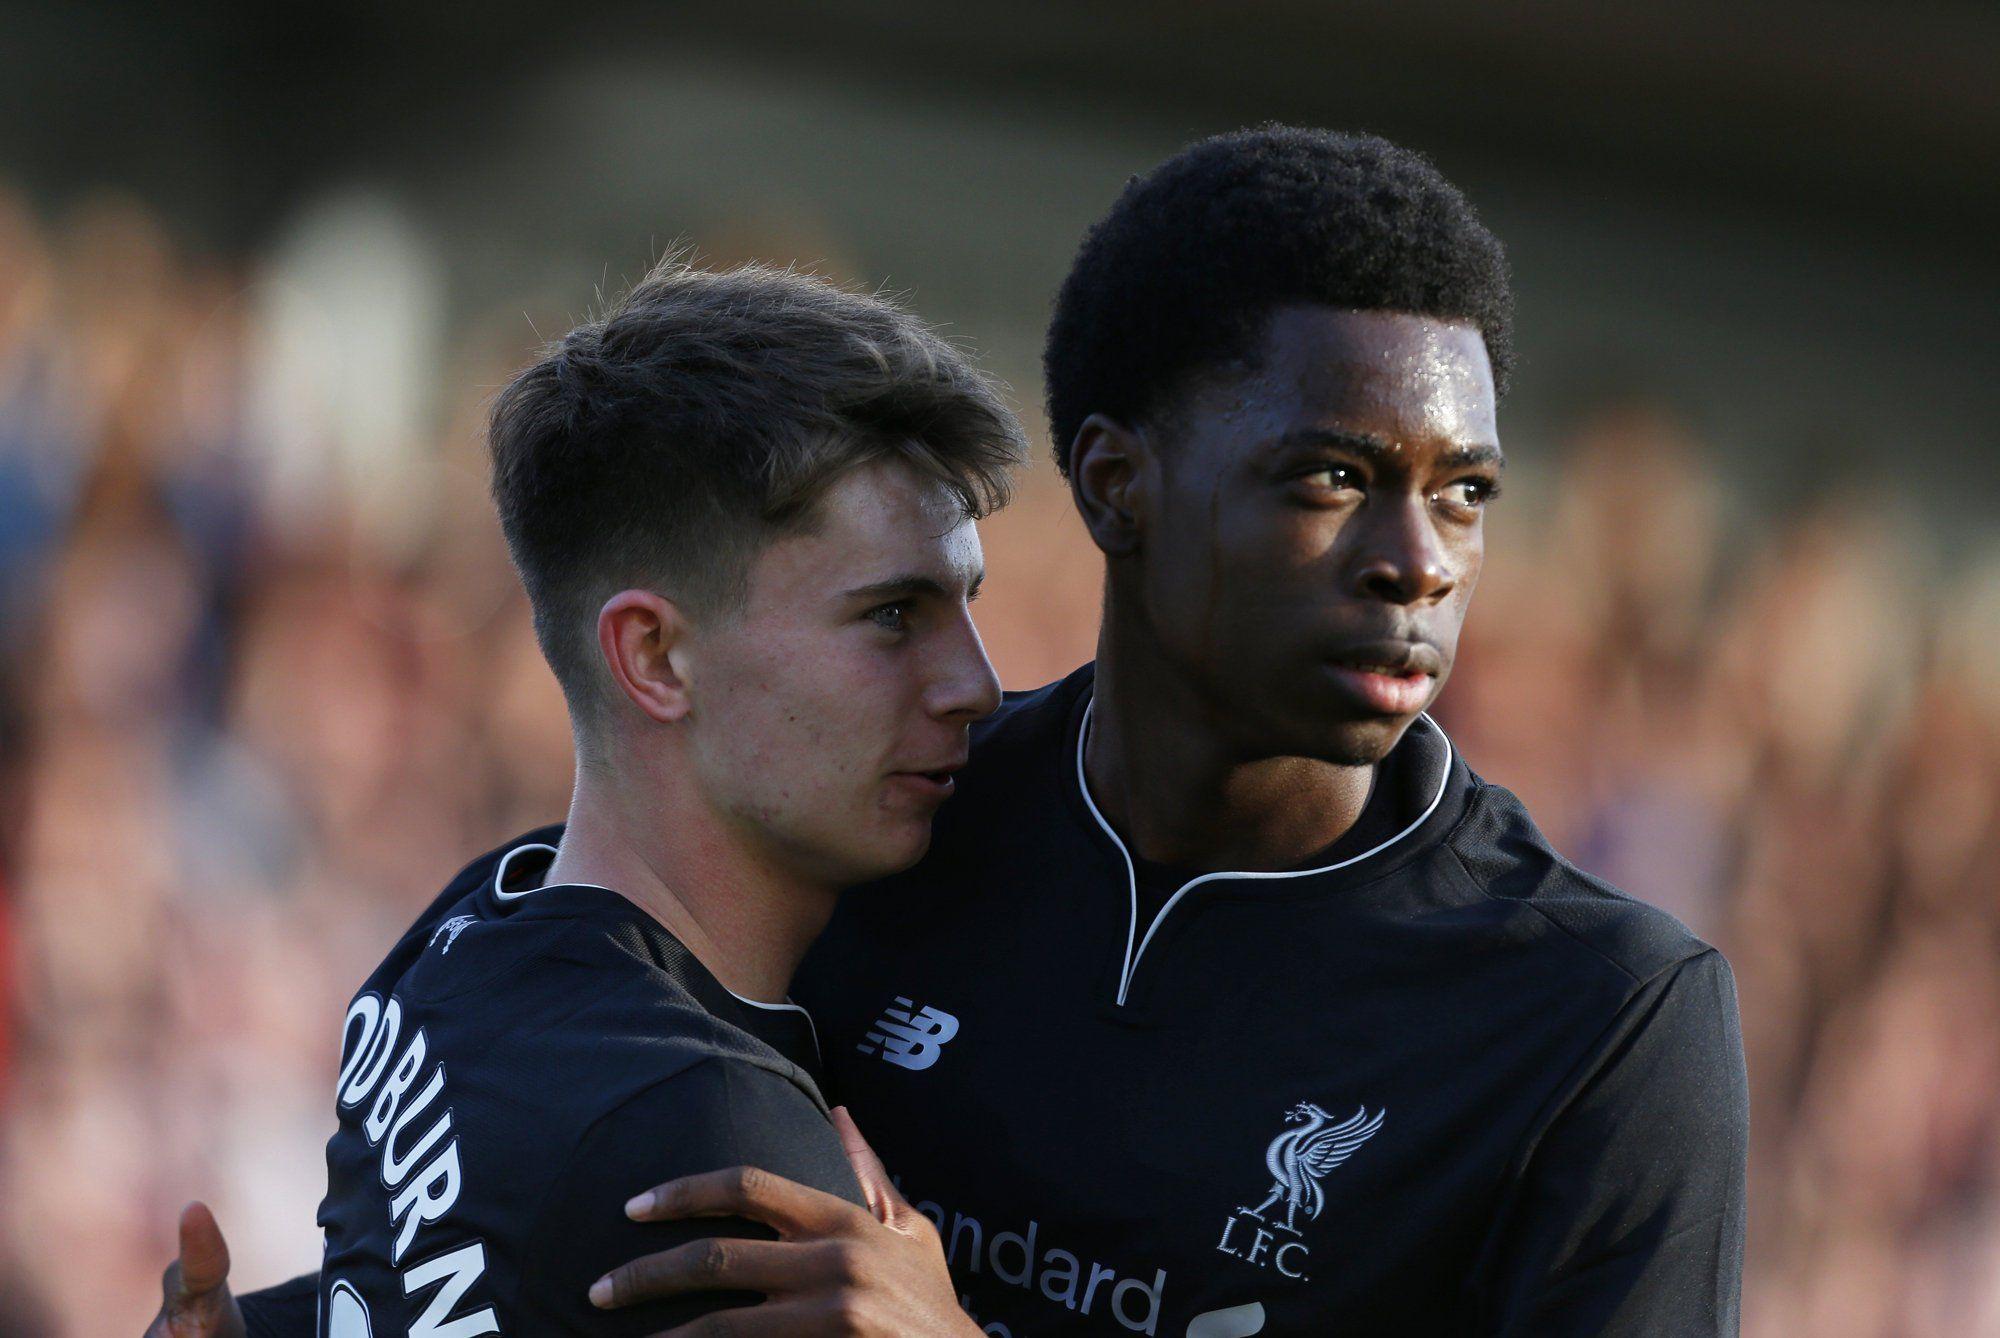 Great image of Ben Woodburn and Ovie Ejaria this evening